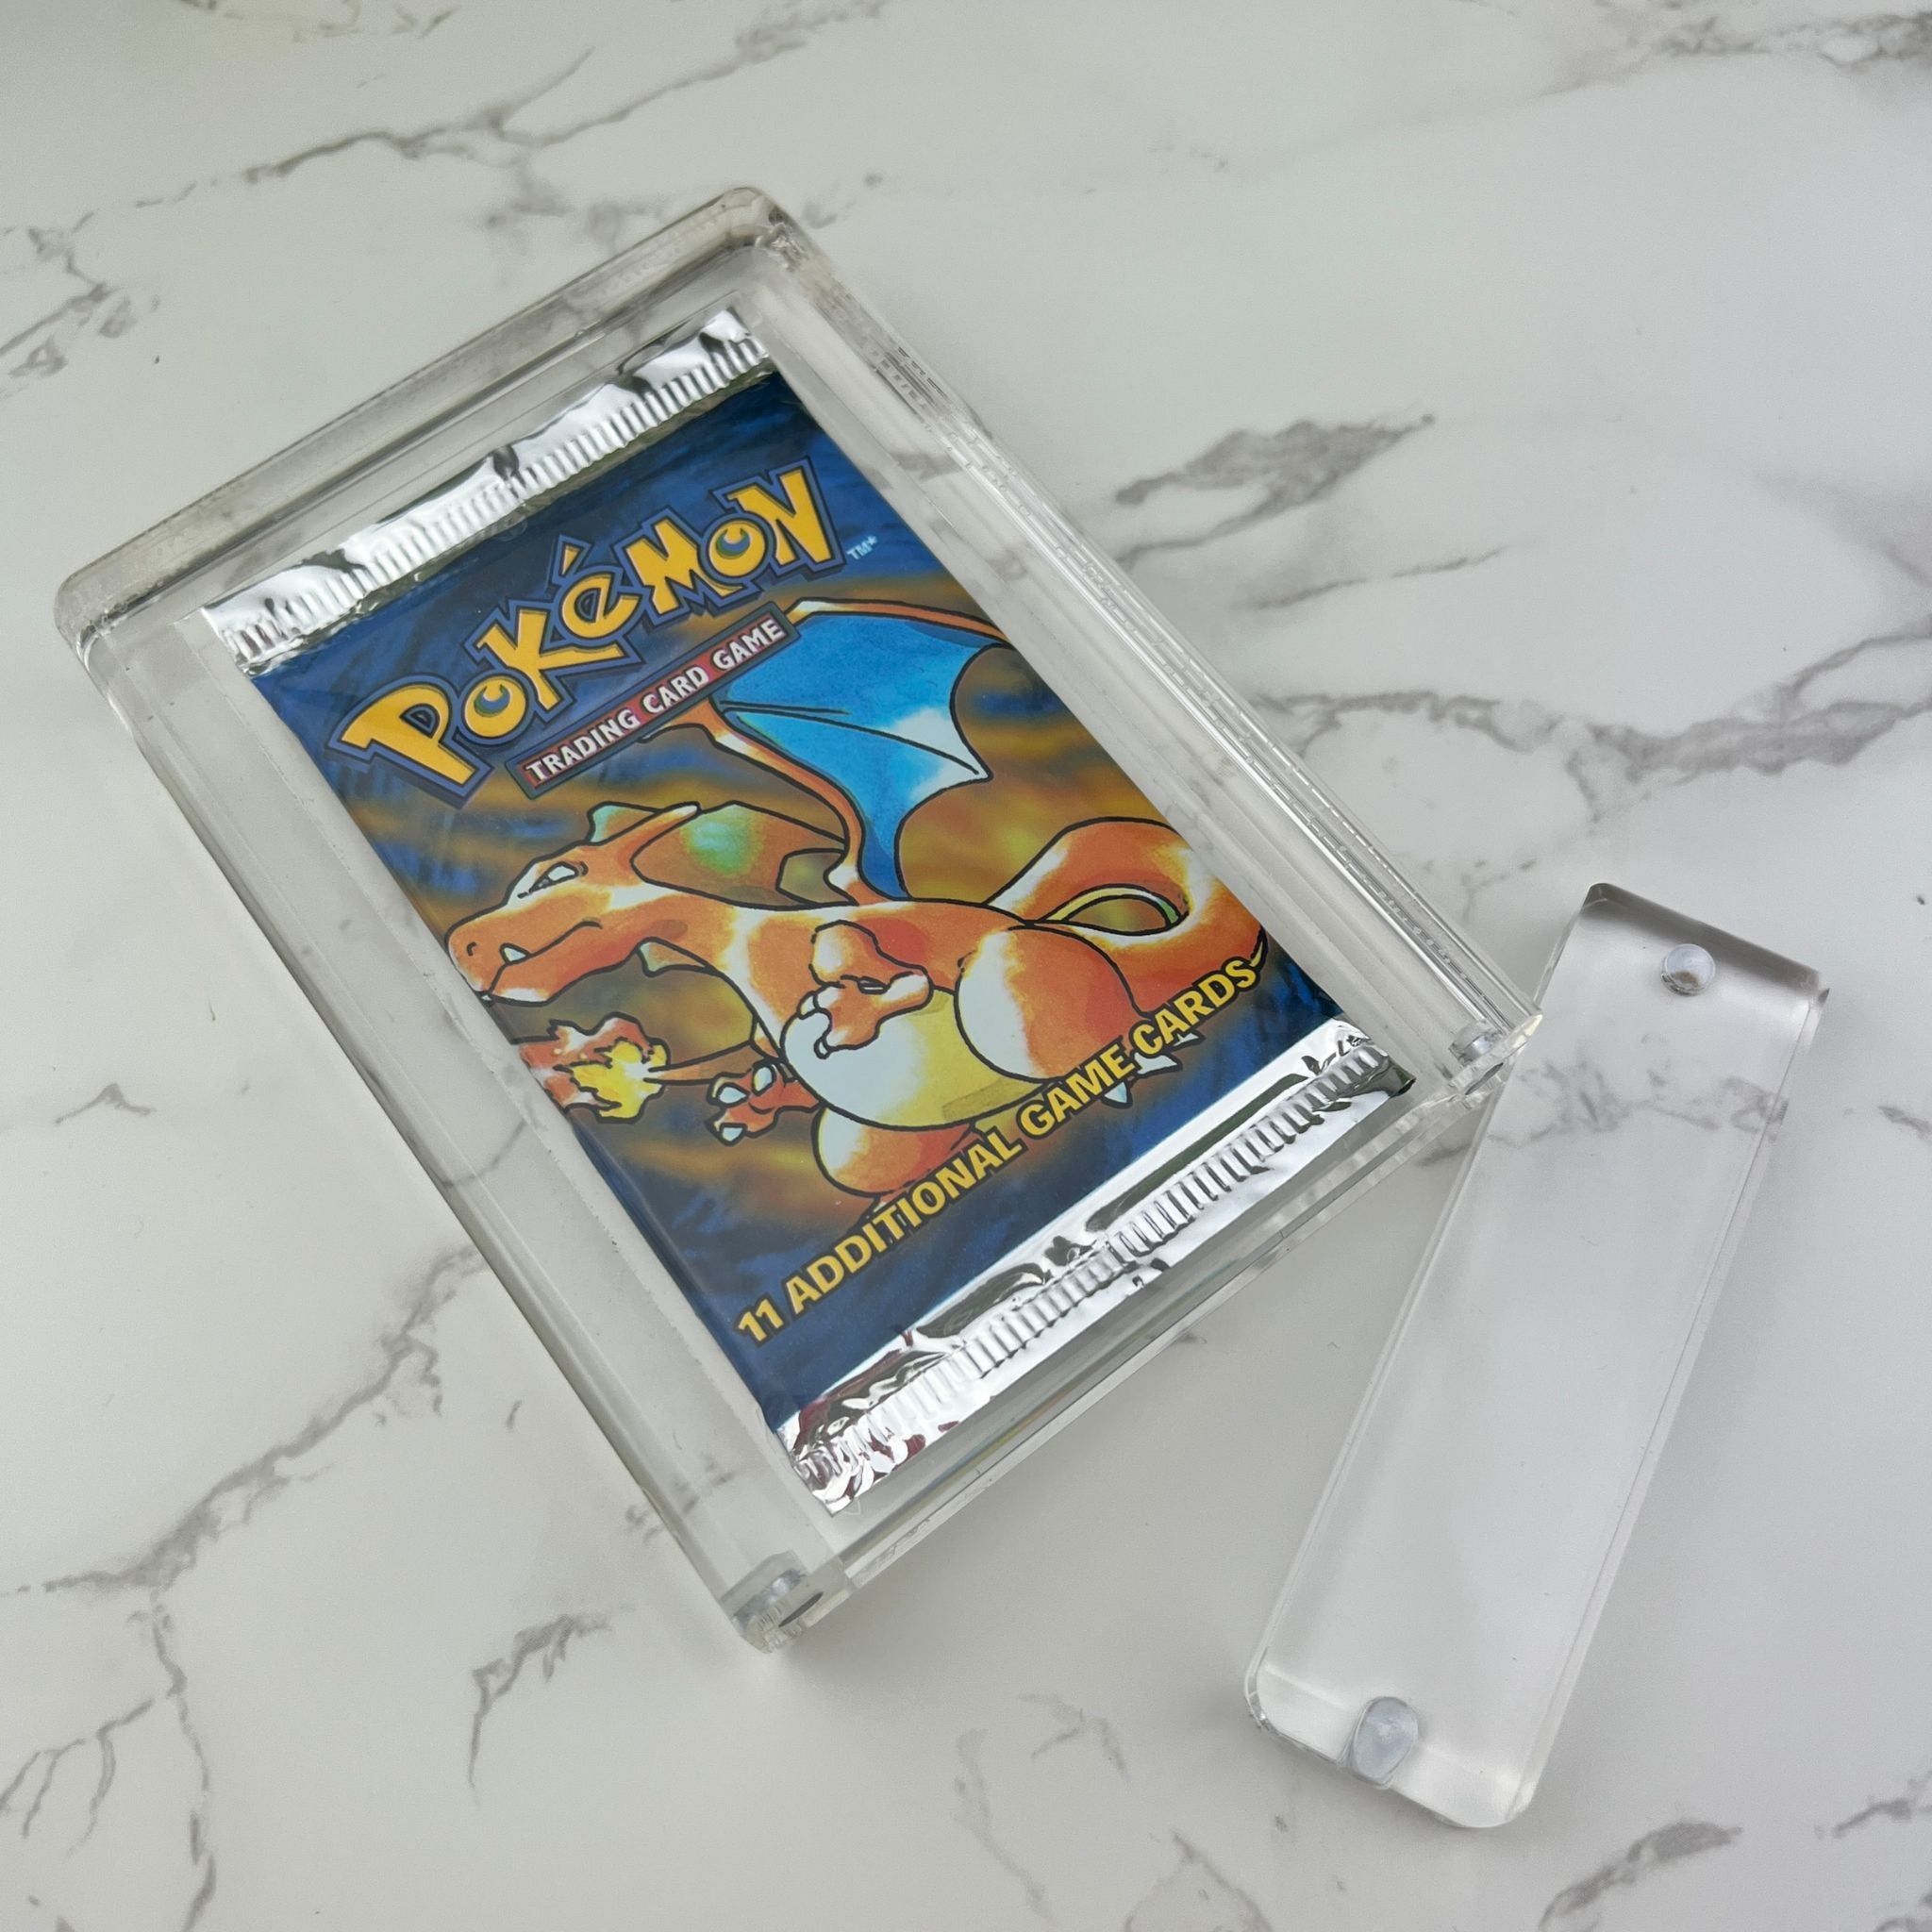 Booster Pack Display Case Box for LONG FOIL Pokémon Booster Packs